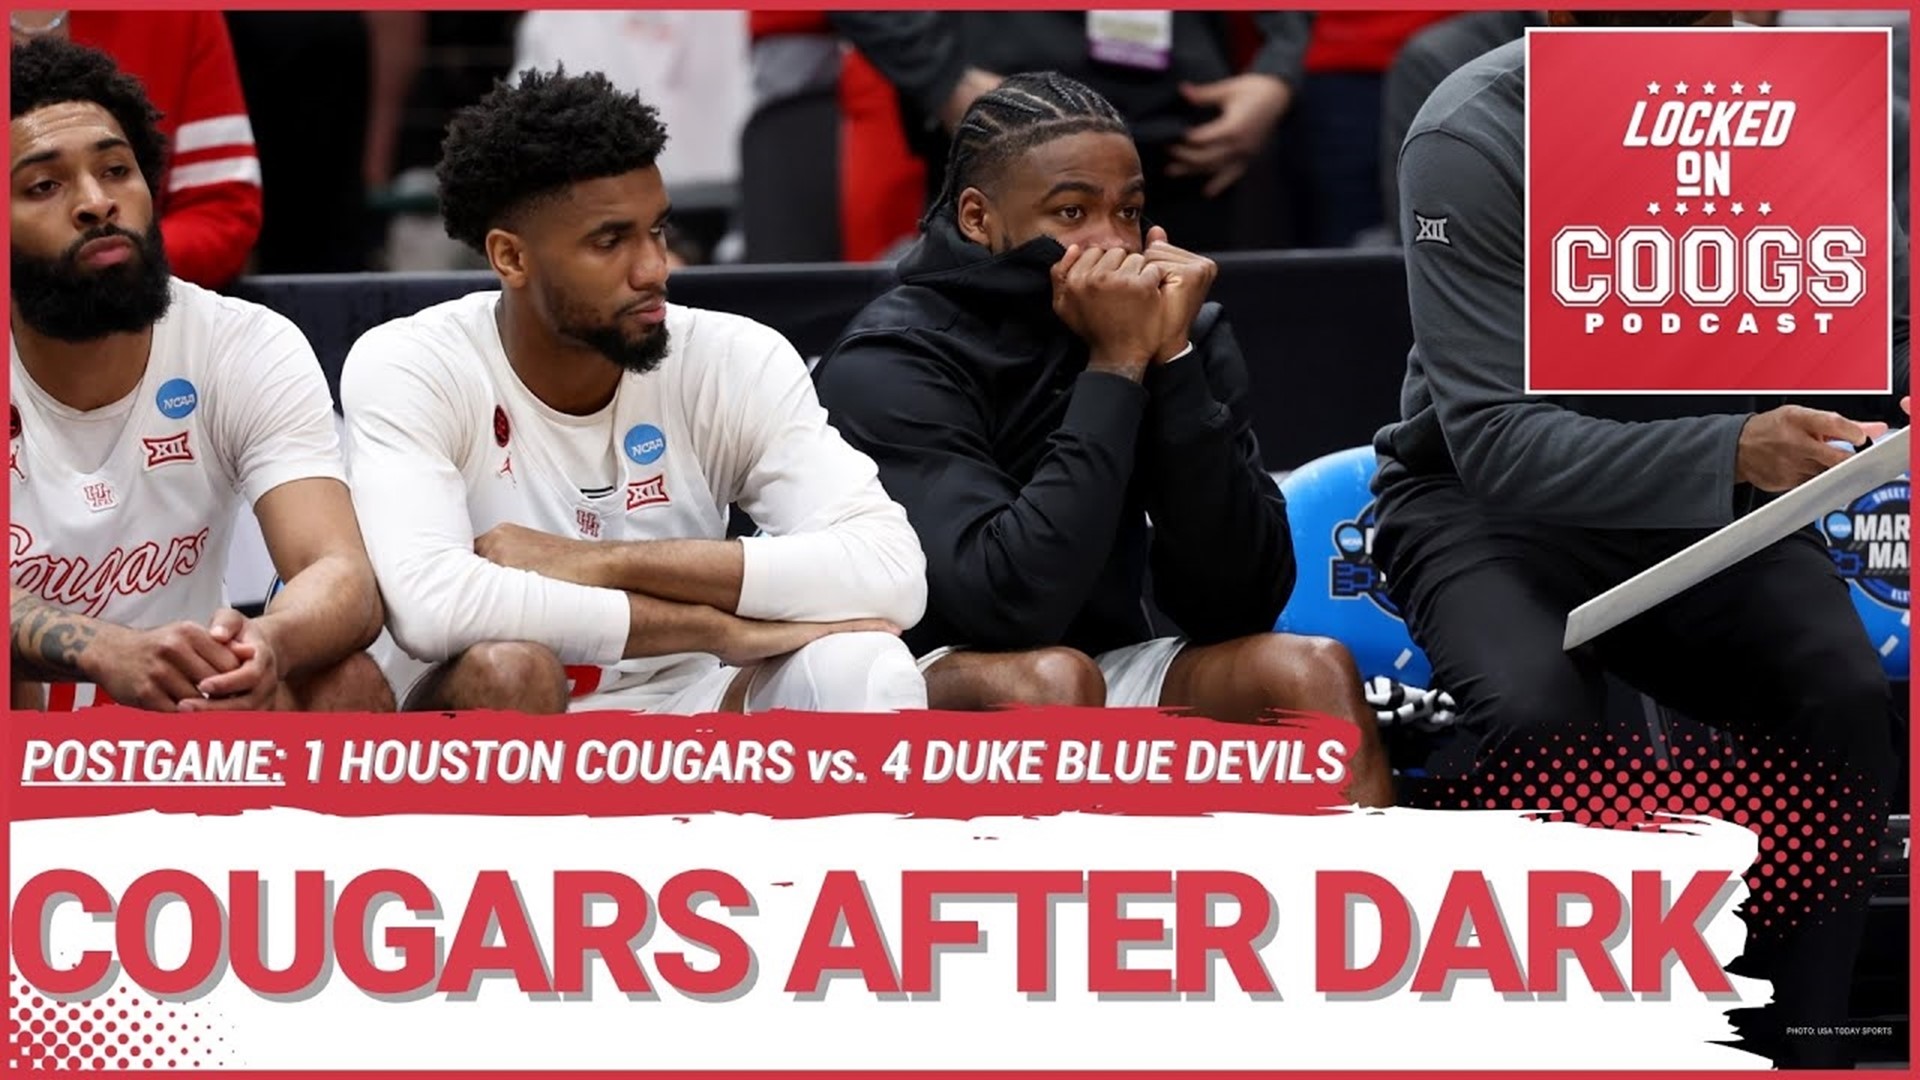 Jamal Shead’s injury shaped this game. But what did it do? How did the rest of the game unfold? Where did Houston push through to almost pull it out?